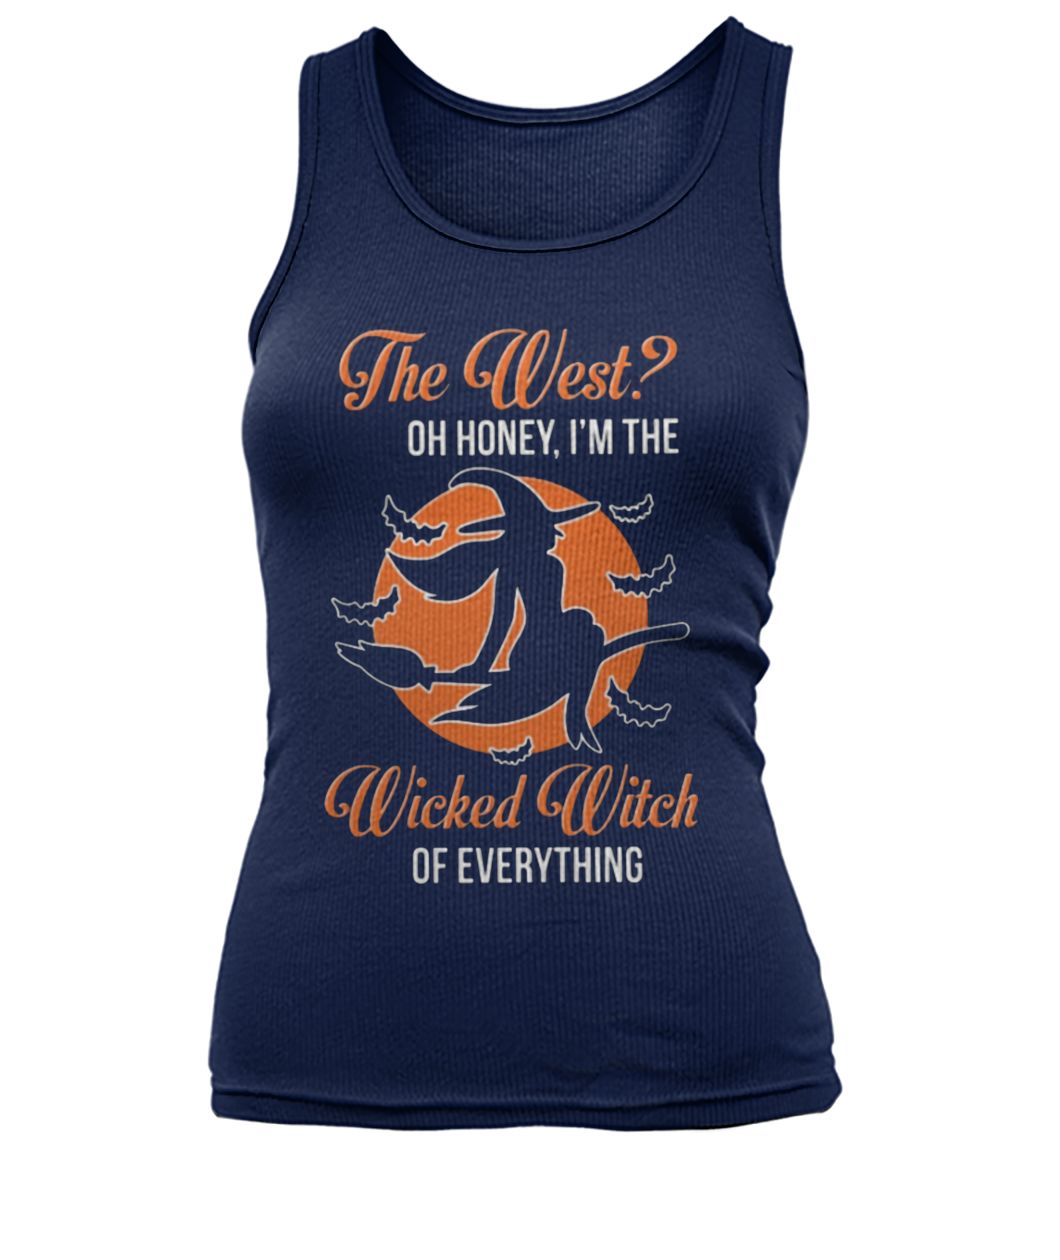 The west oh honey I'm the wicked witch of everything women's tank top